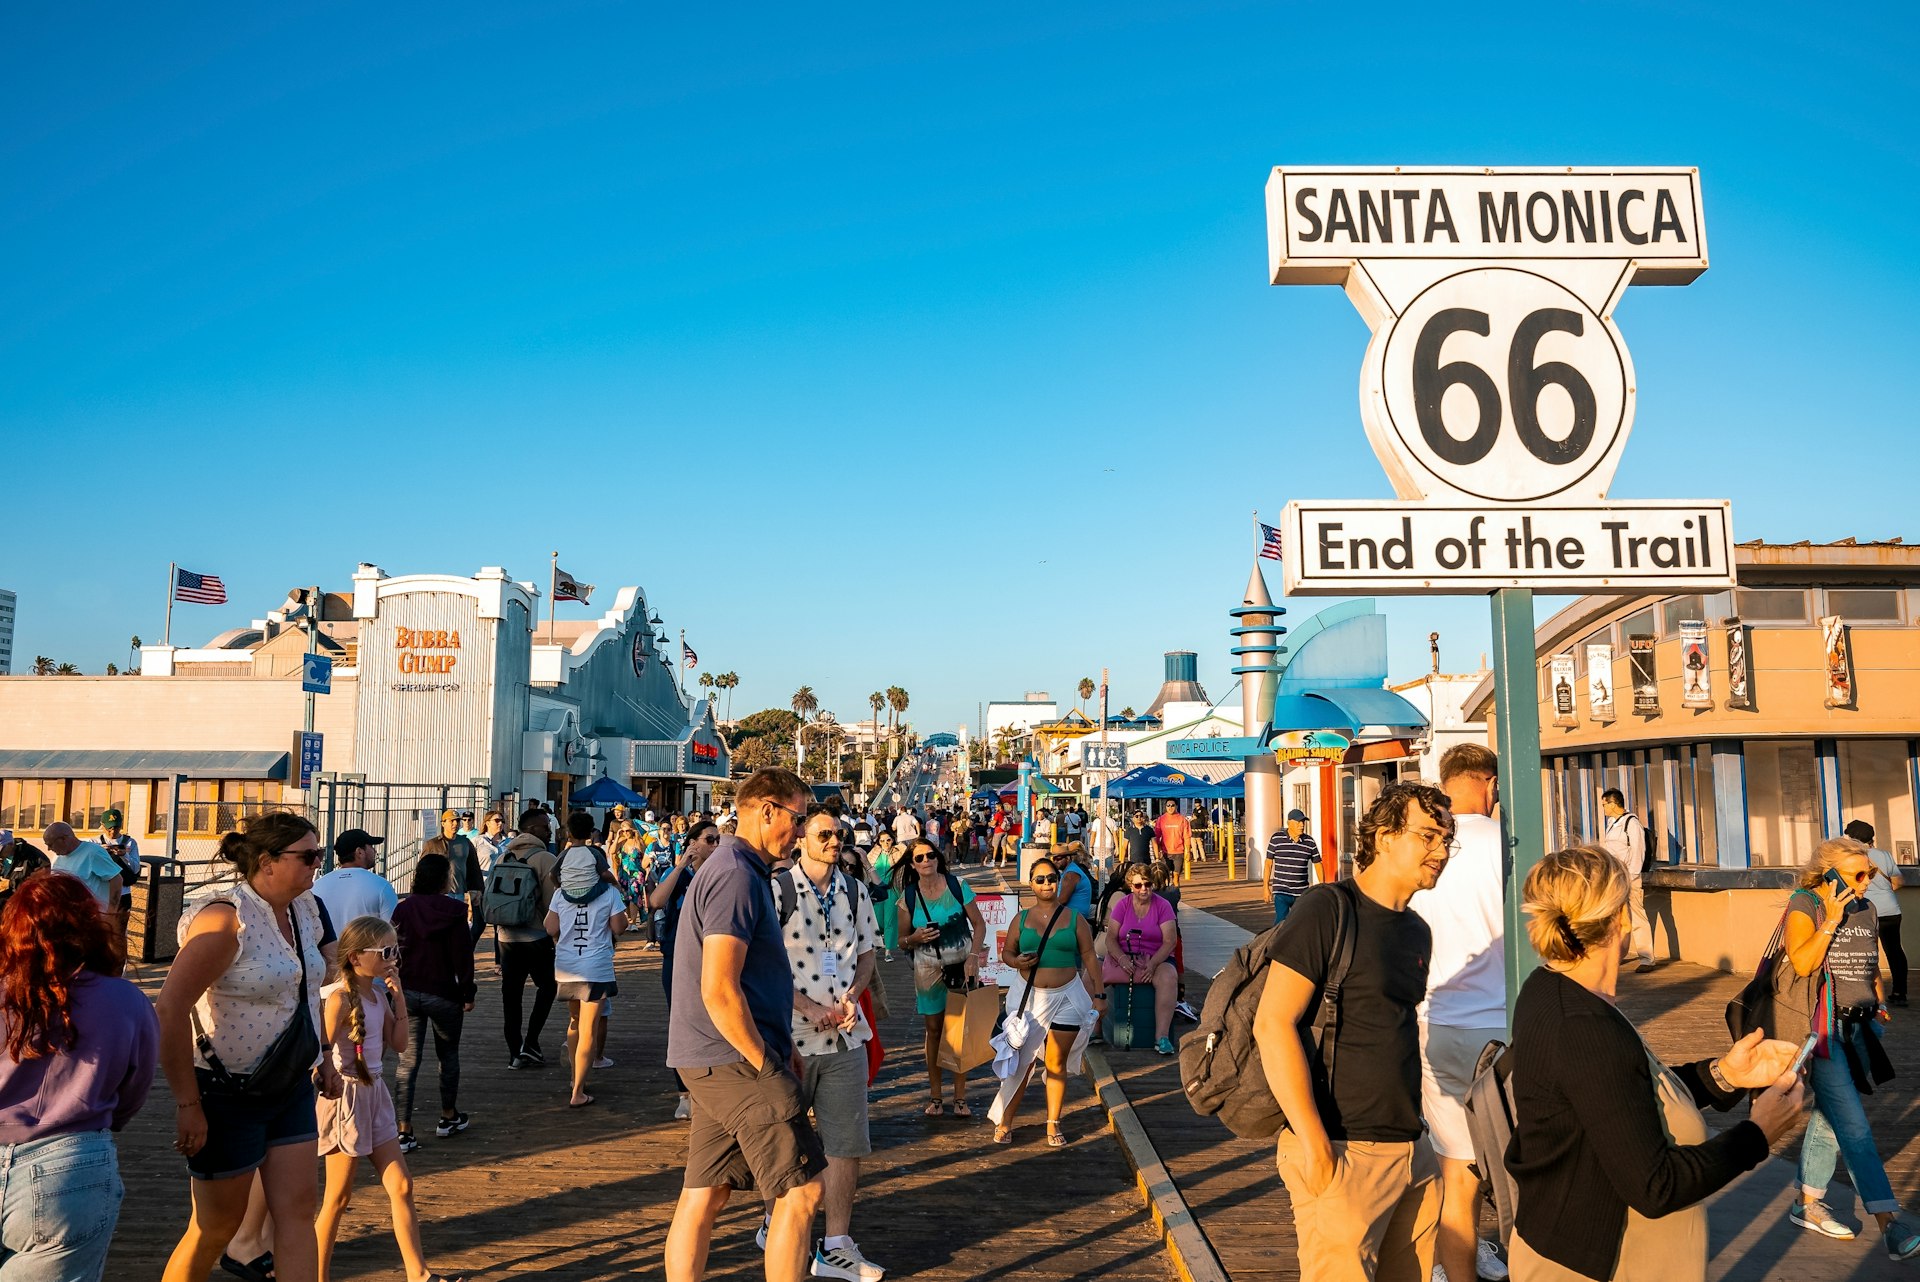 People walking by Santa Monica 66 end of the trail road sign at the Santa Monica Pier under clear blue sky, Santa Monica, California, USA